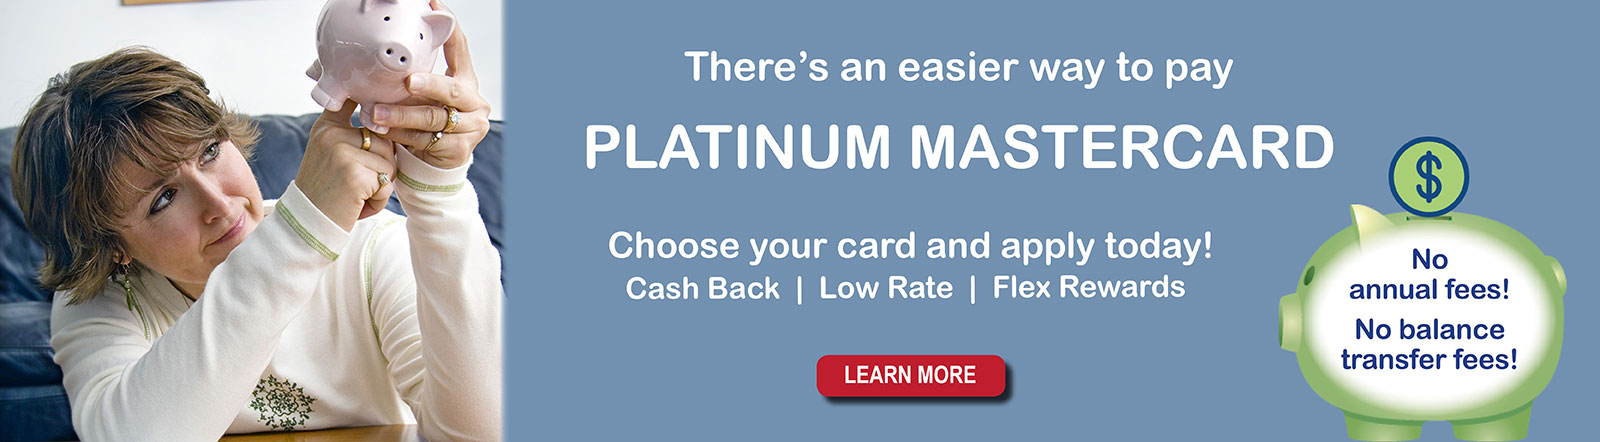 There's an easier way to pay - Platinum Mastercard.